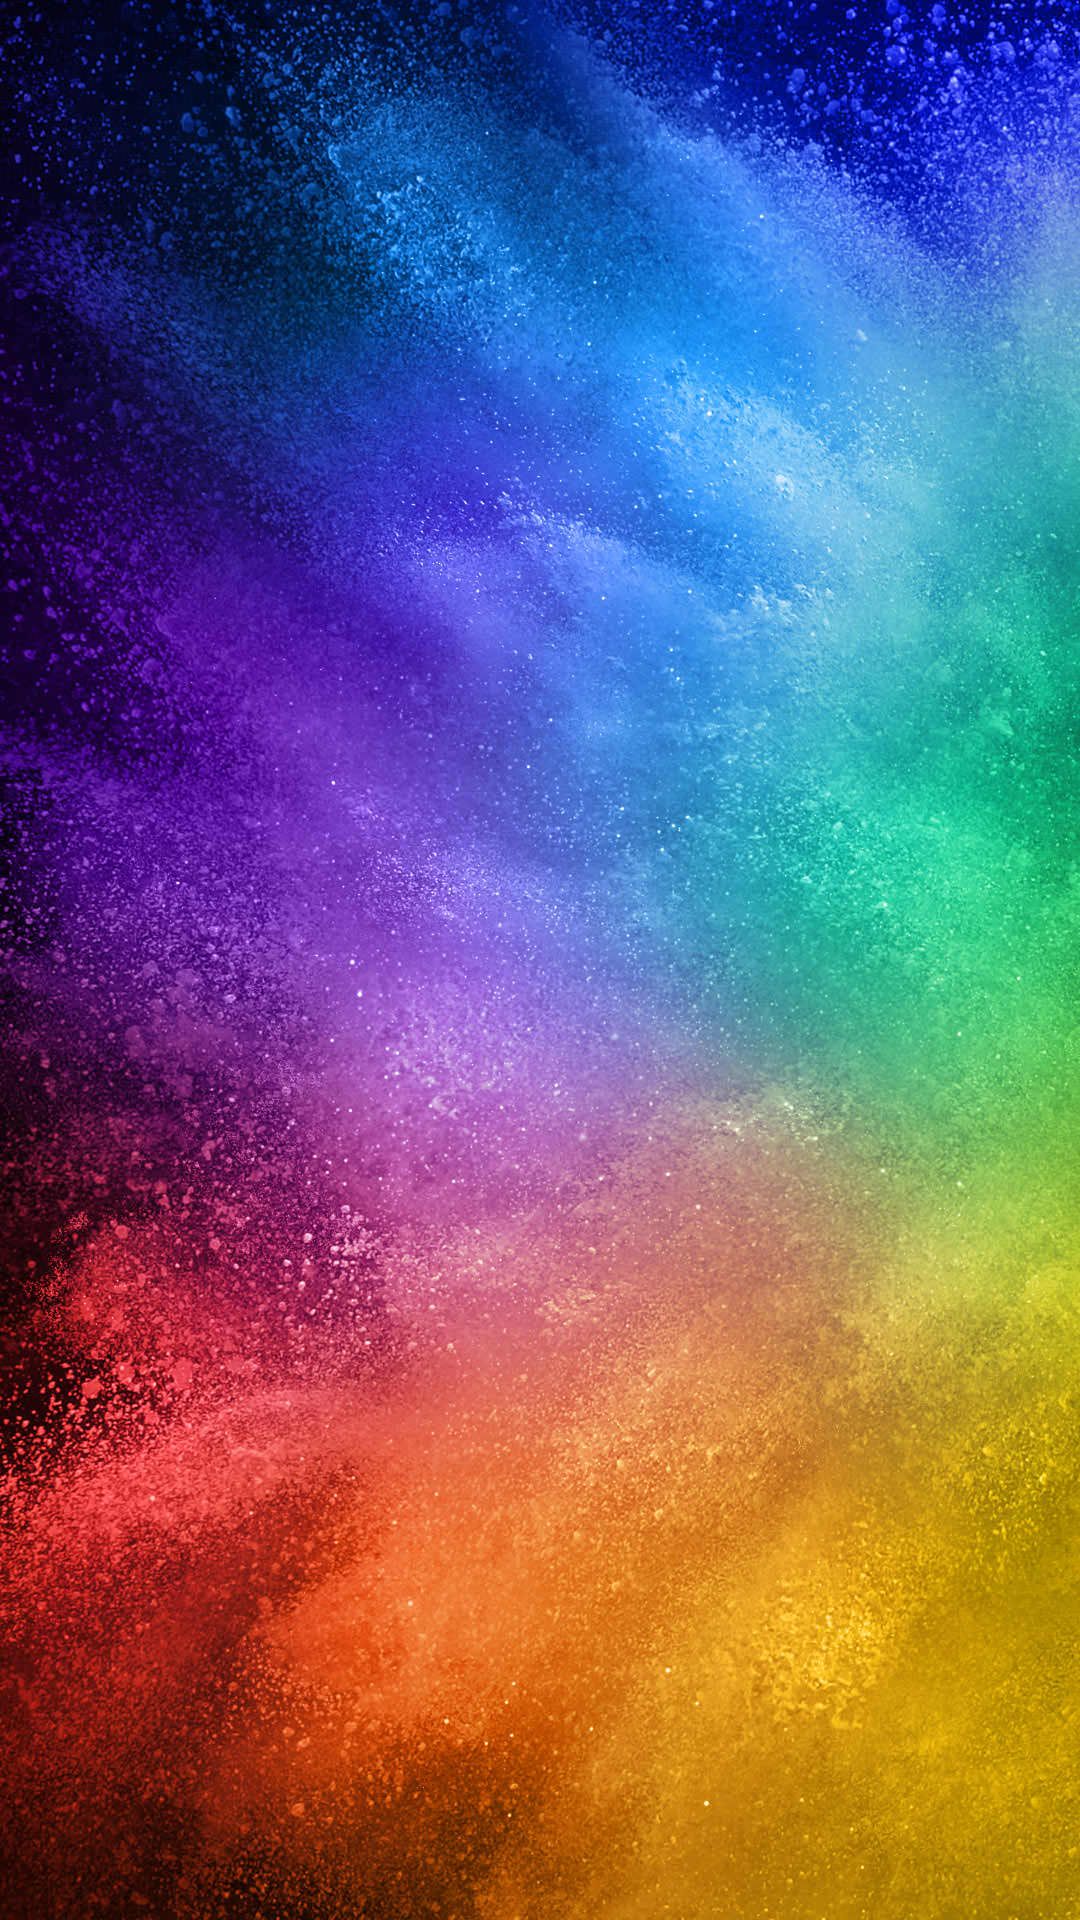 Some awesome amoled wallpaper tap to view full quality photo